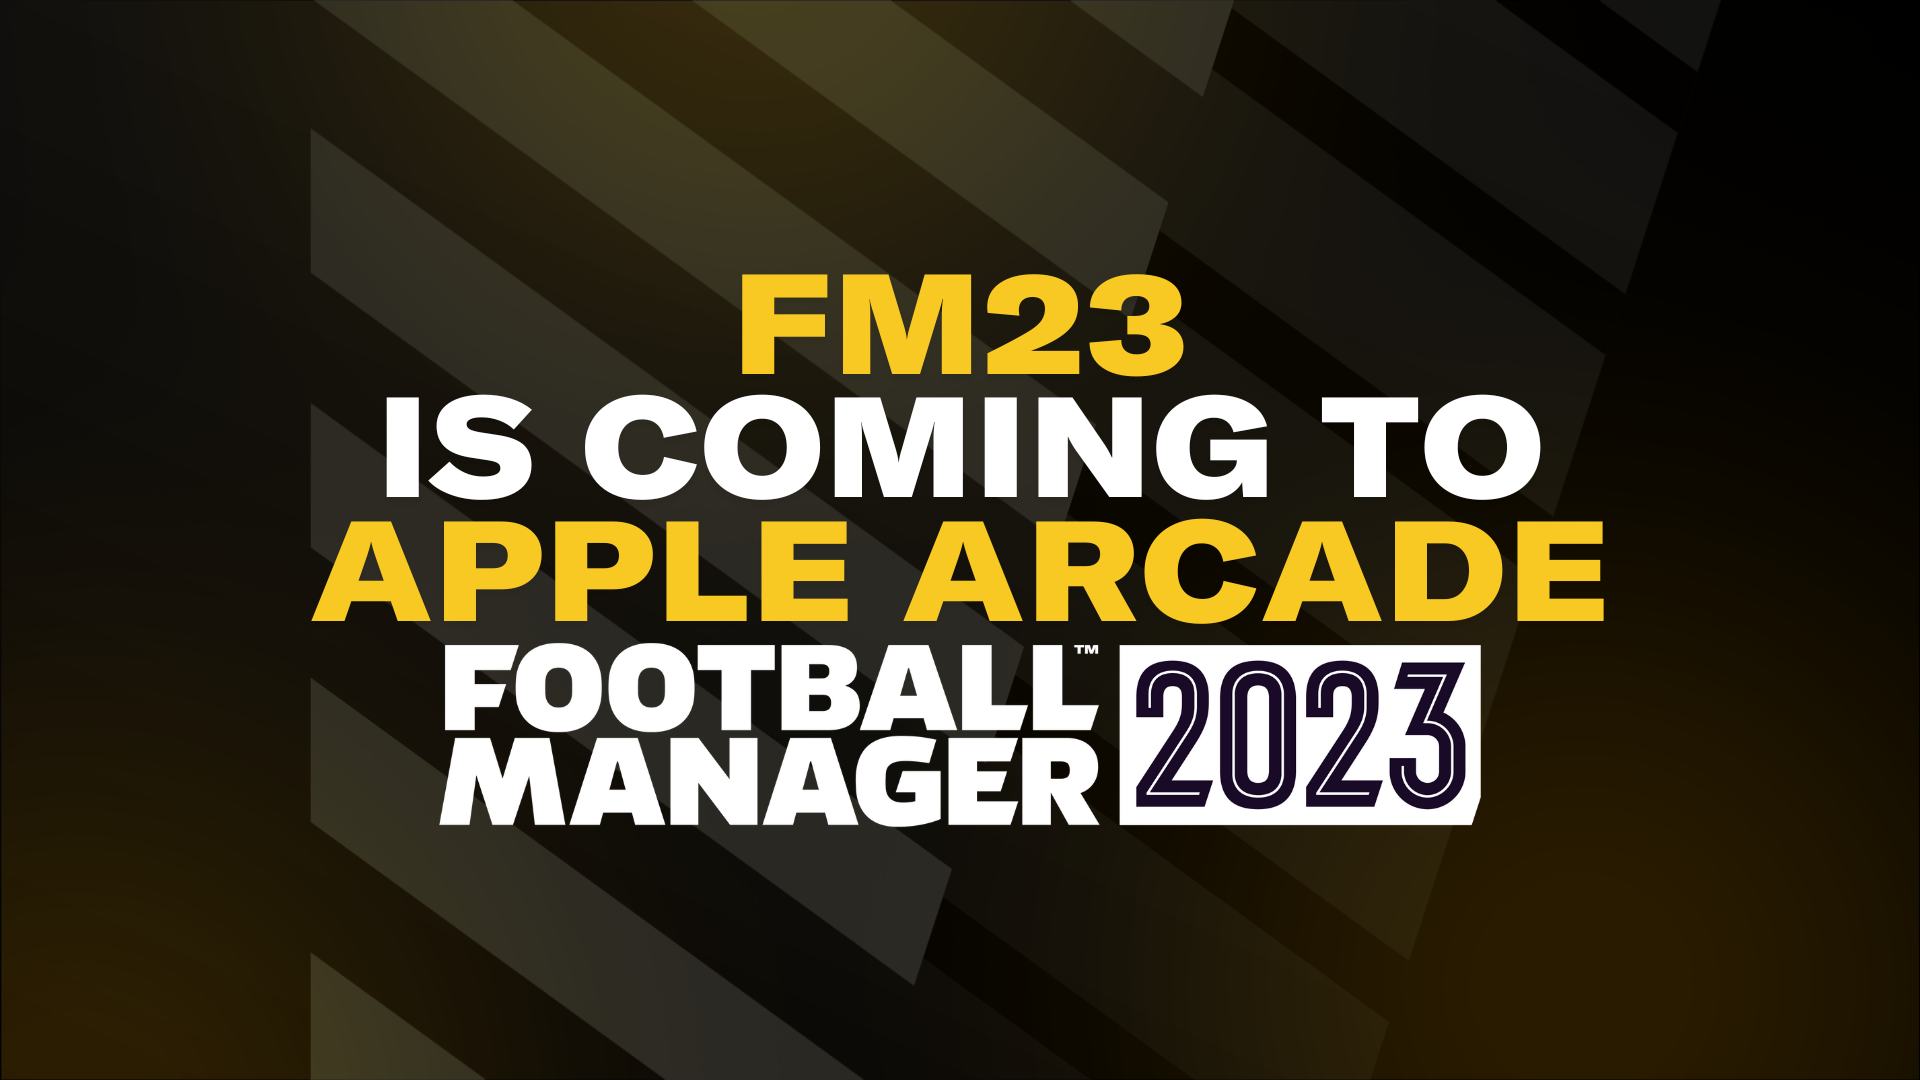 Football Manager 2023 is Coming to Apple Arcade